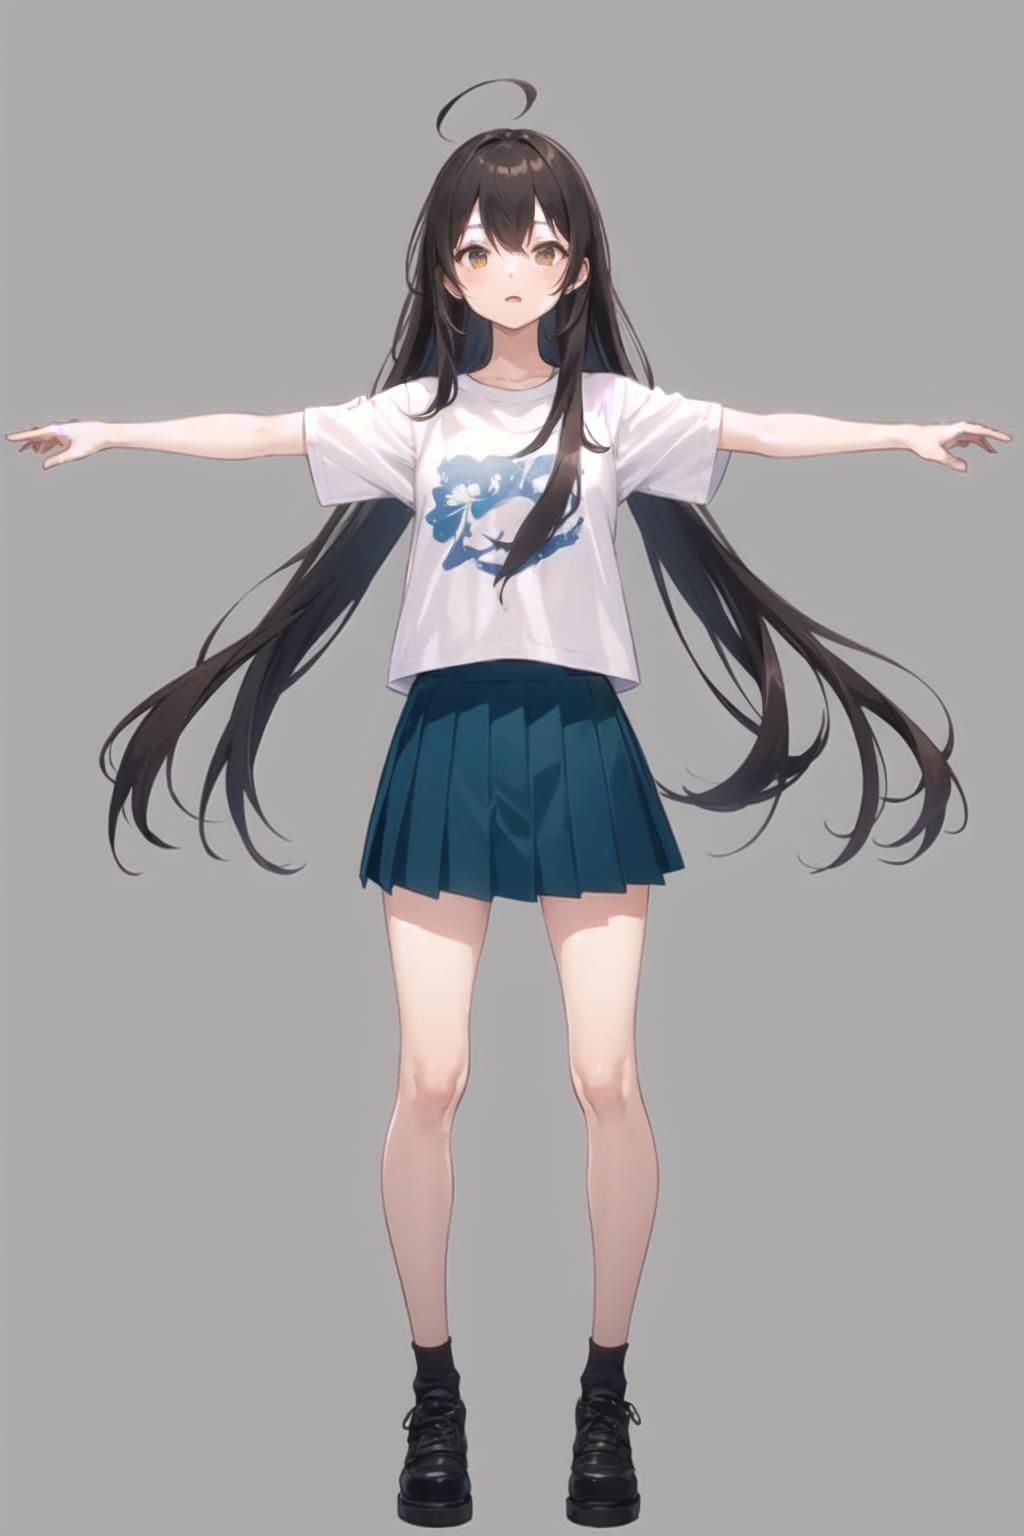 T-pose to show superiority | T-Pose | Know Your Meme